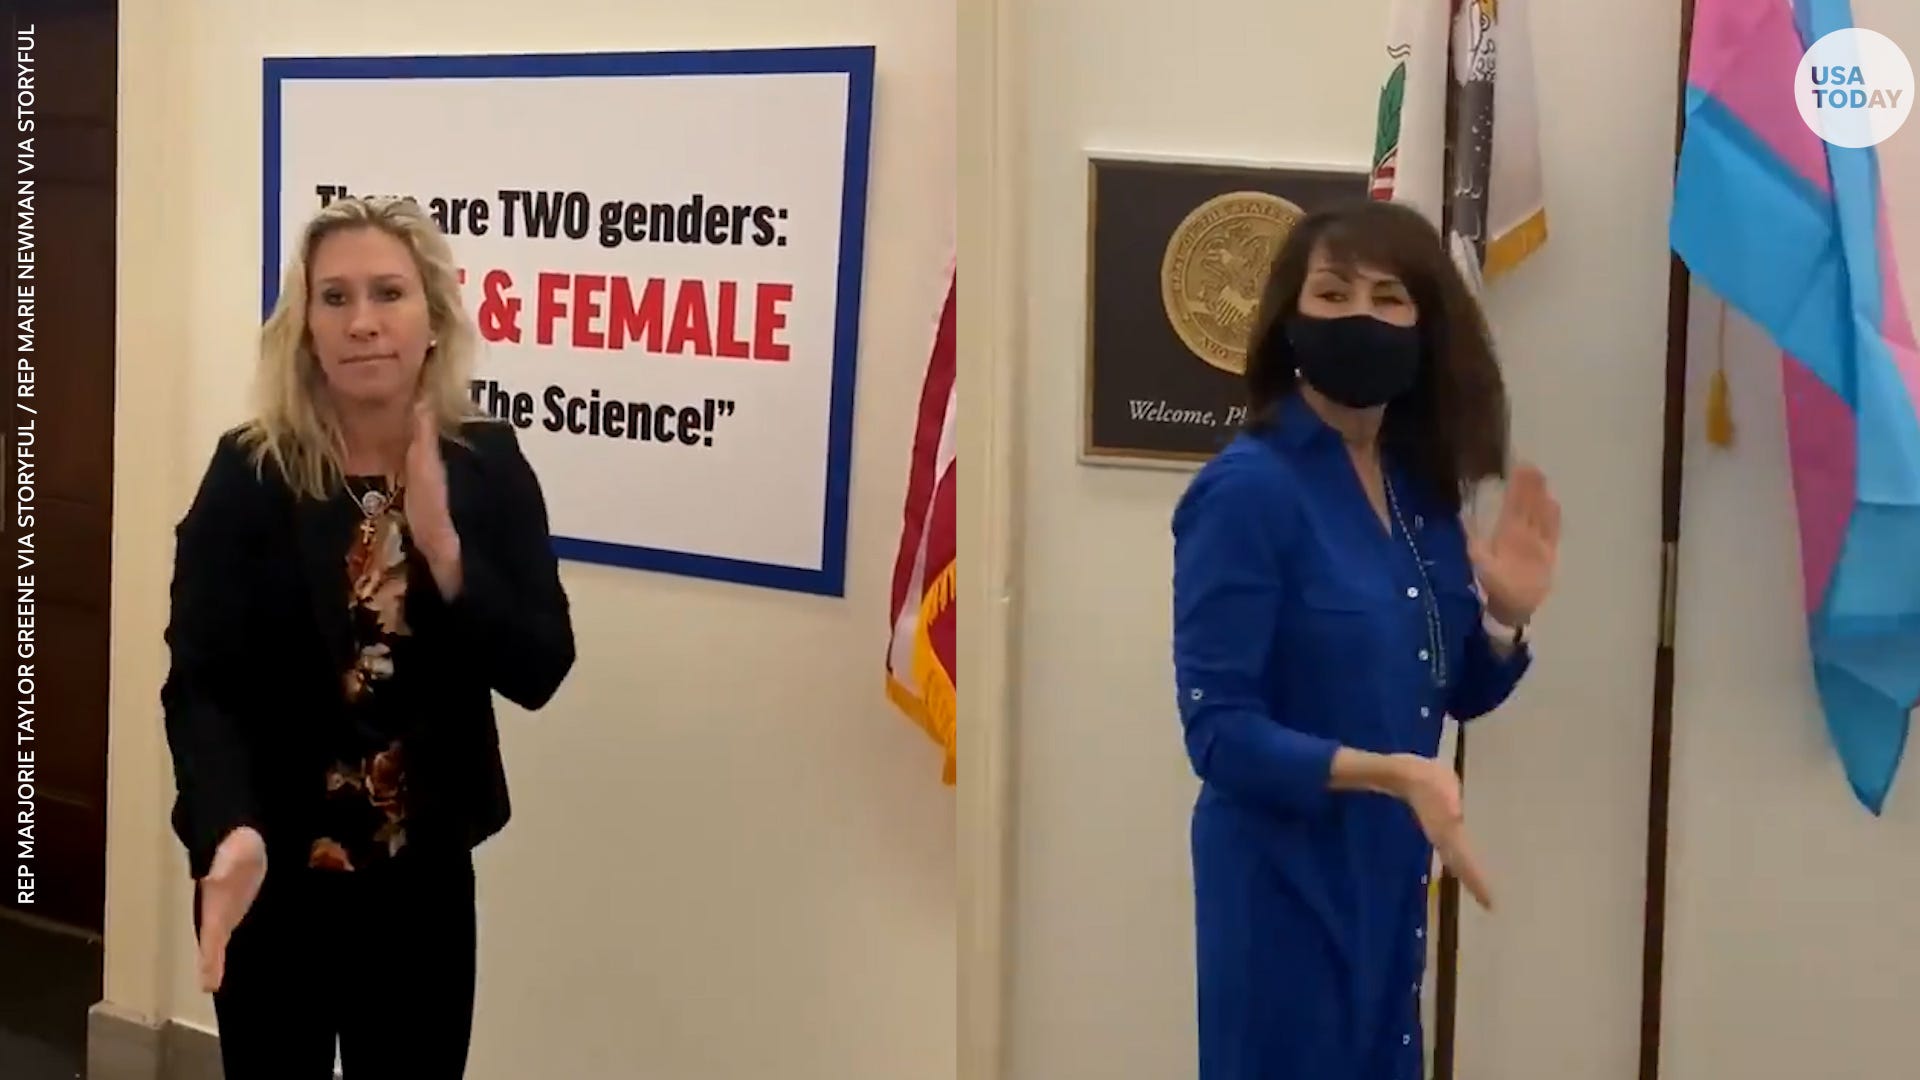 U.S. Rep. Marjorie Taylor Greene is under fire following a Twitter feud with Democratic Rep. Marie Newman over LGBTQ rights.